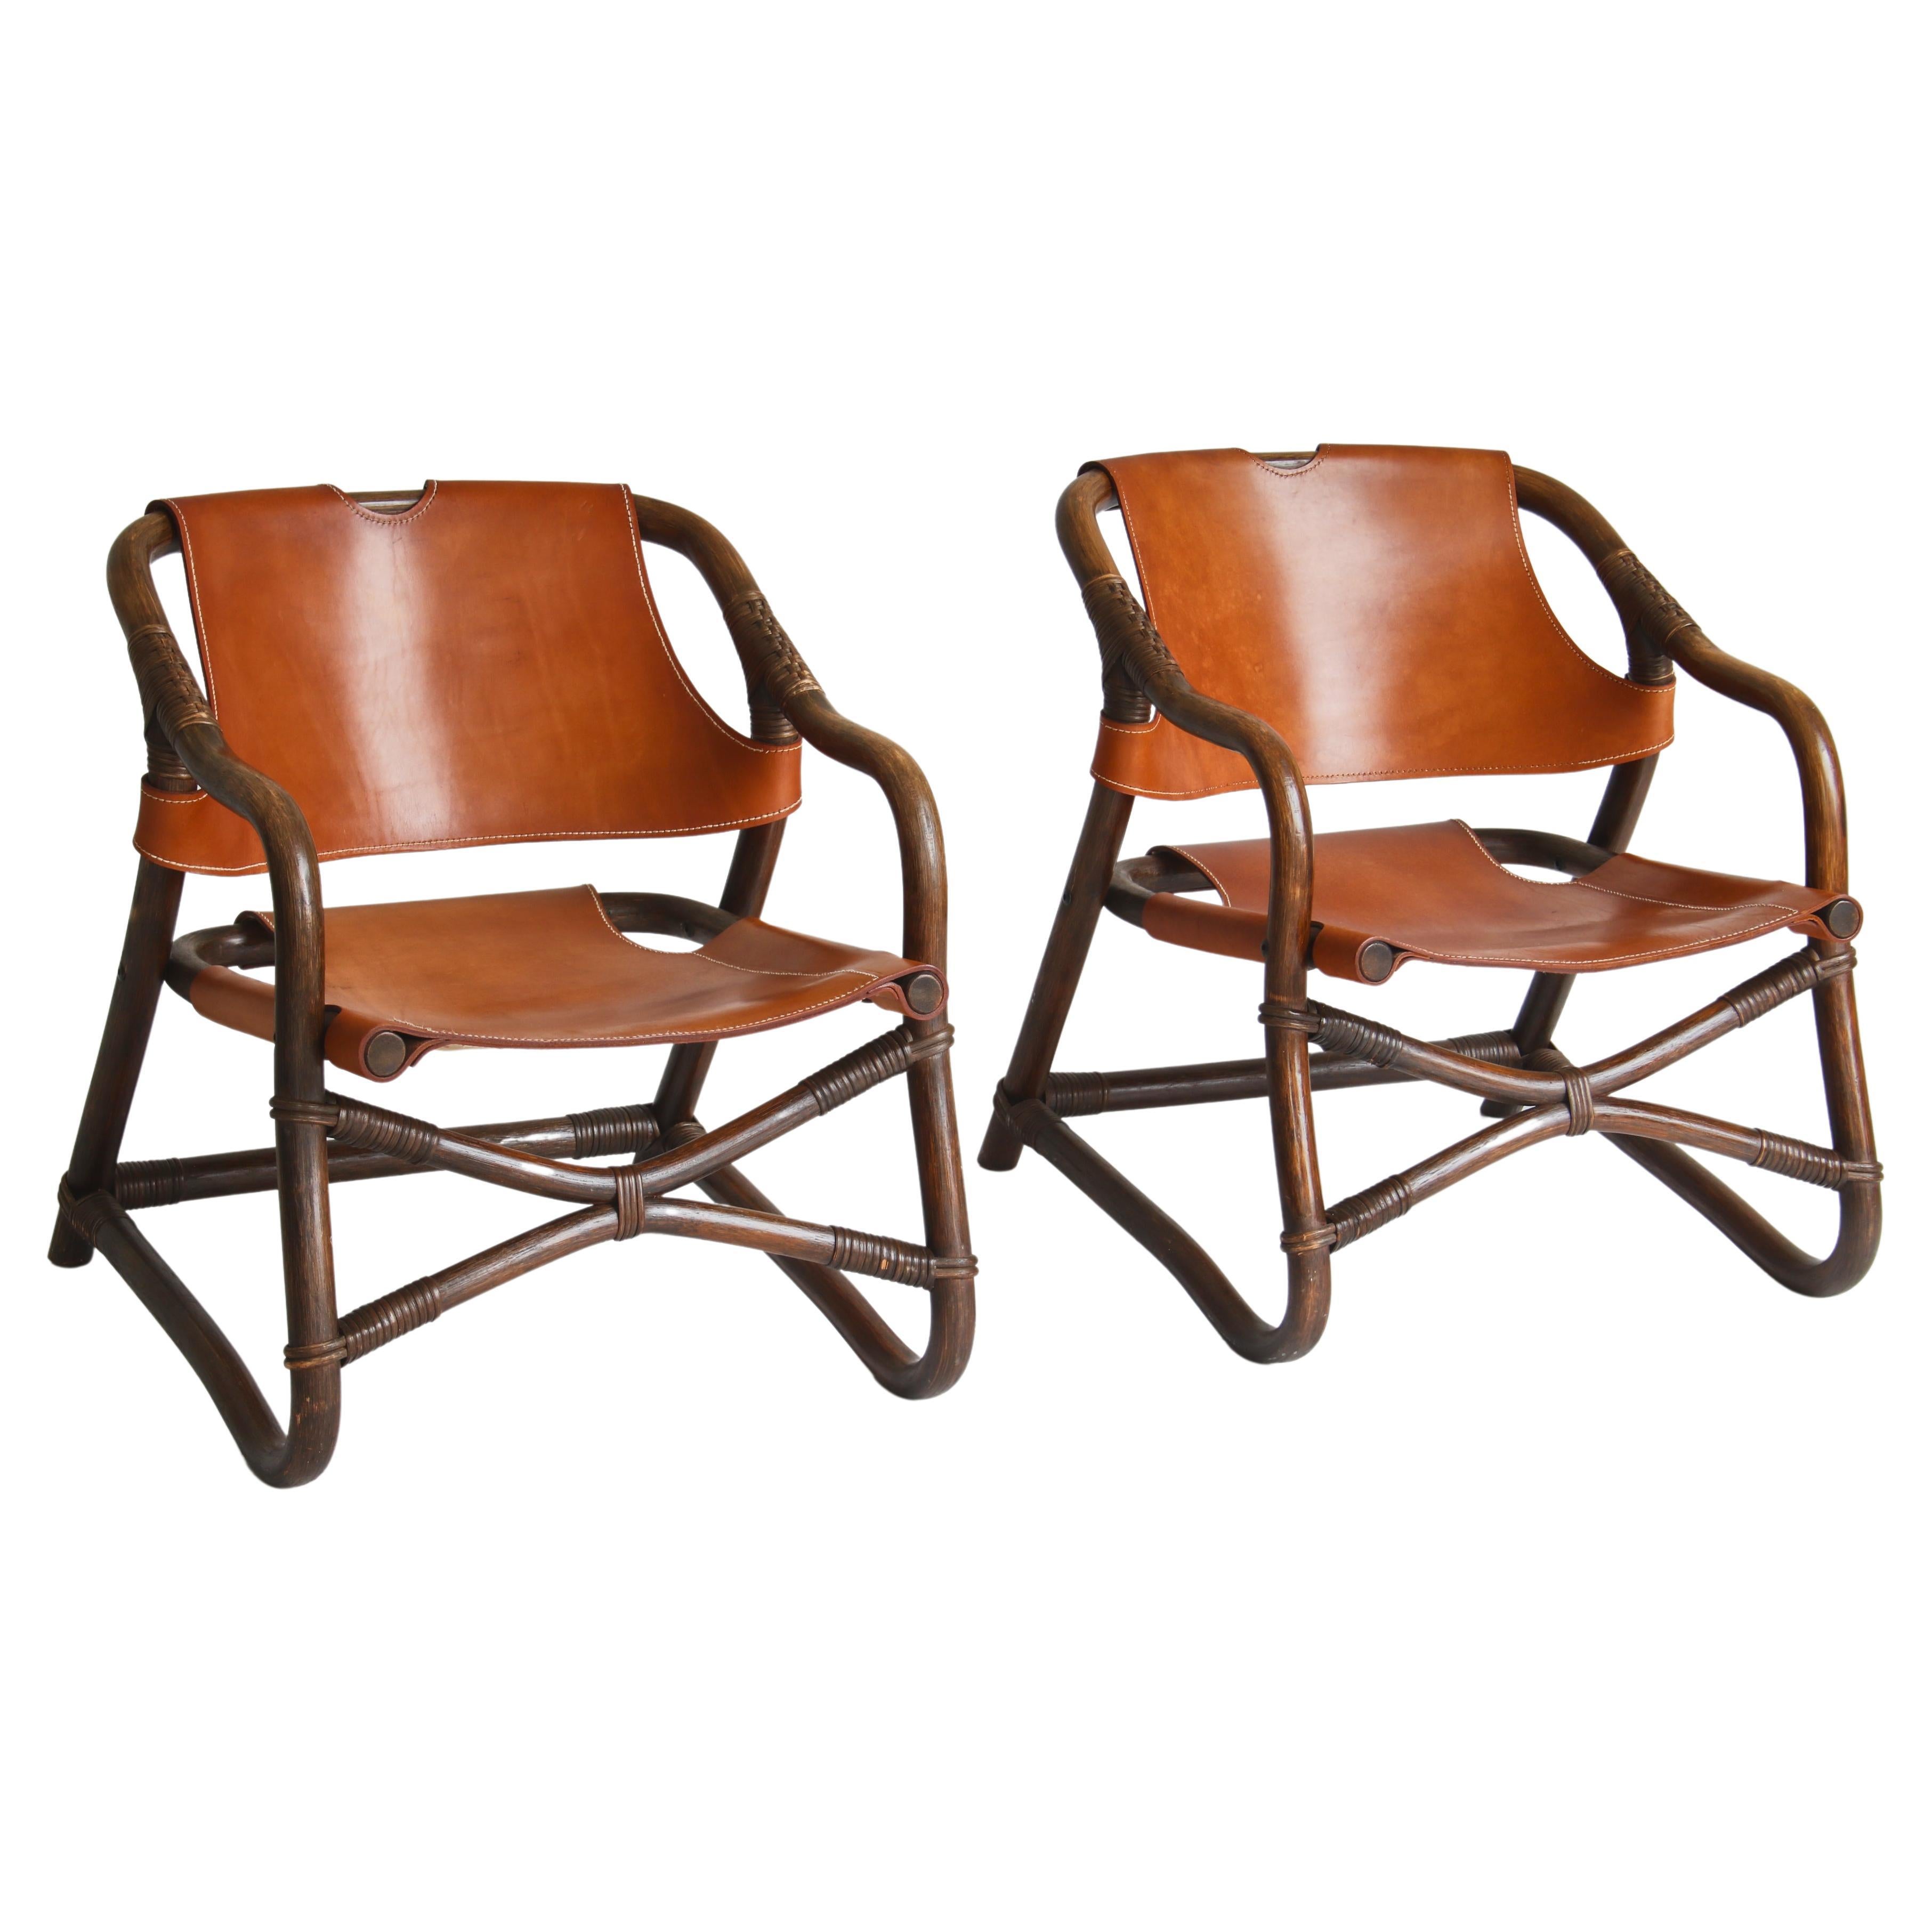 1960s Danish Modern "Manilla" Lounge Chairs in Stained Bamboo and Saddle Leather For Sale